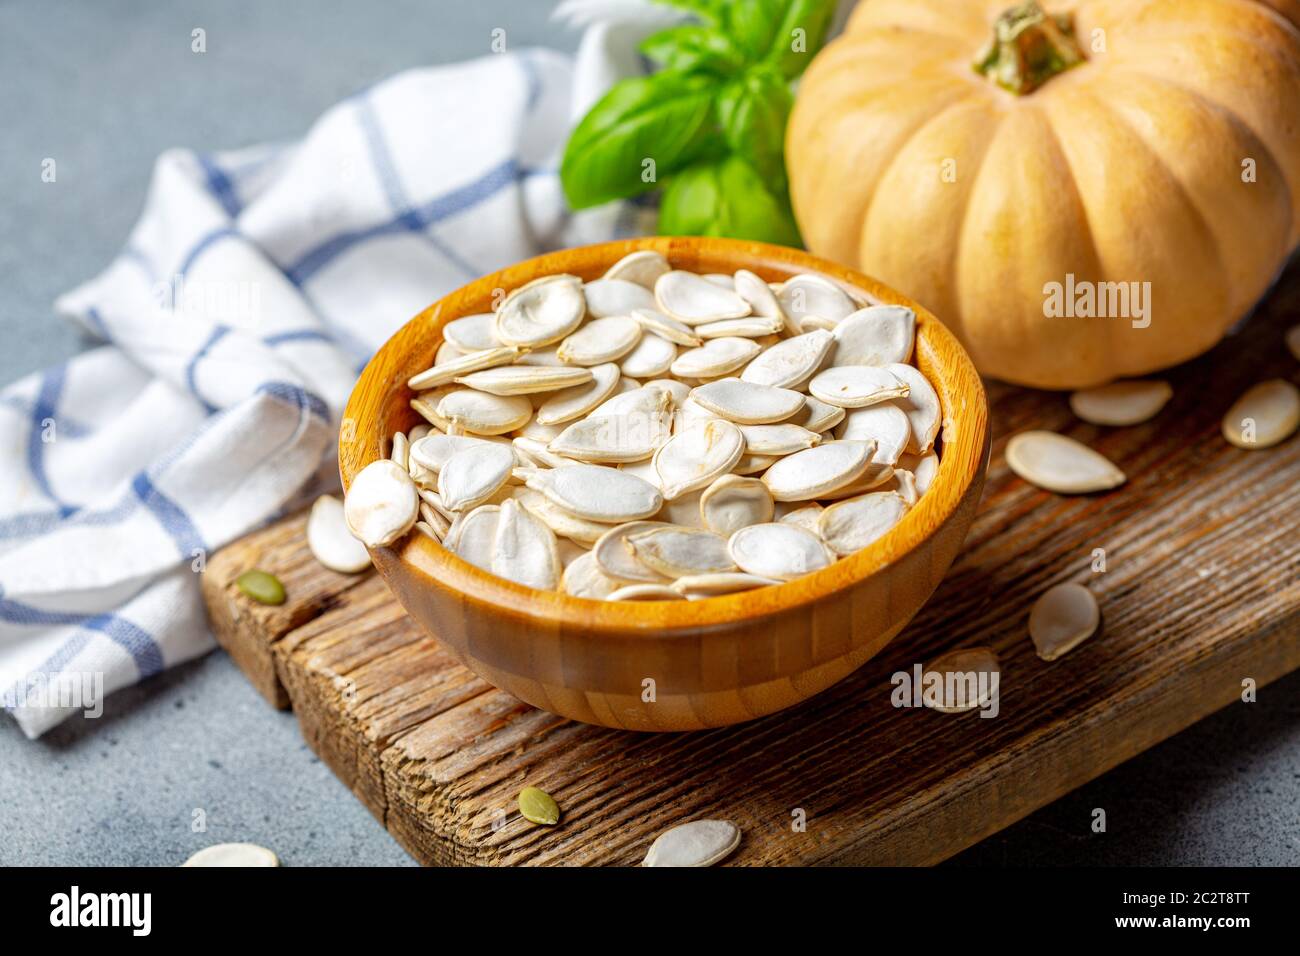 Unpeeled pumpkin seeds in a wooden bowl. Stock Photo